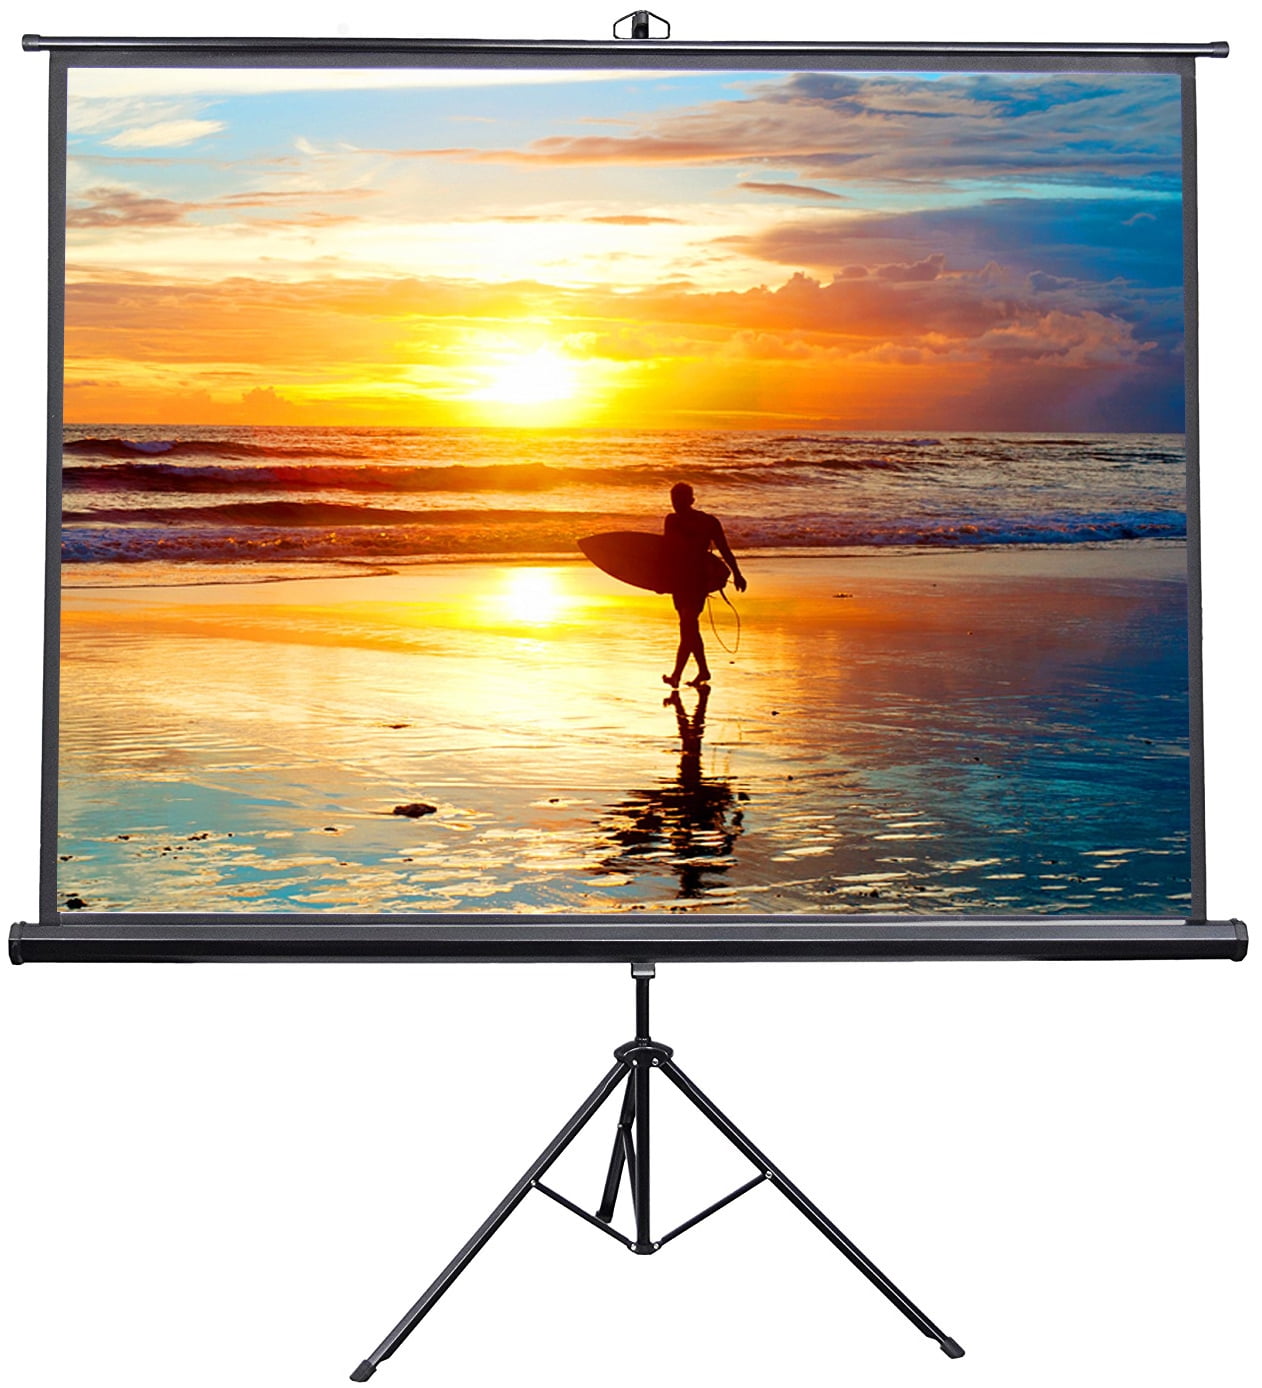 Vivohome 100" HD Projector Screen Stand & Hanging Indoor Outdoor Projection 2in1 